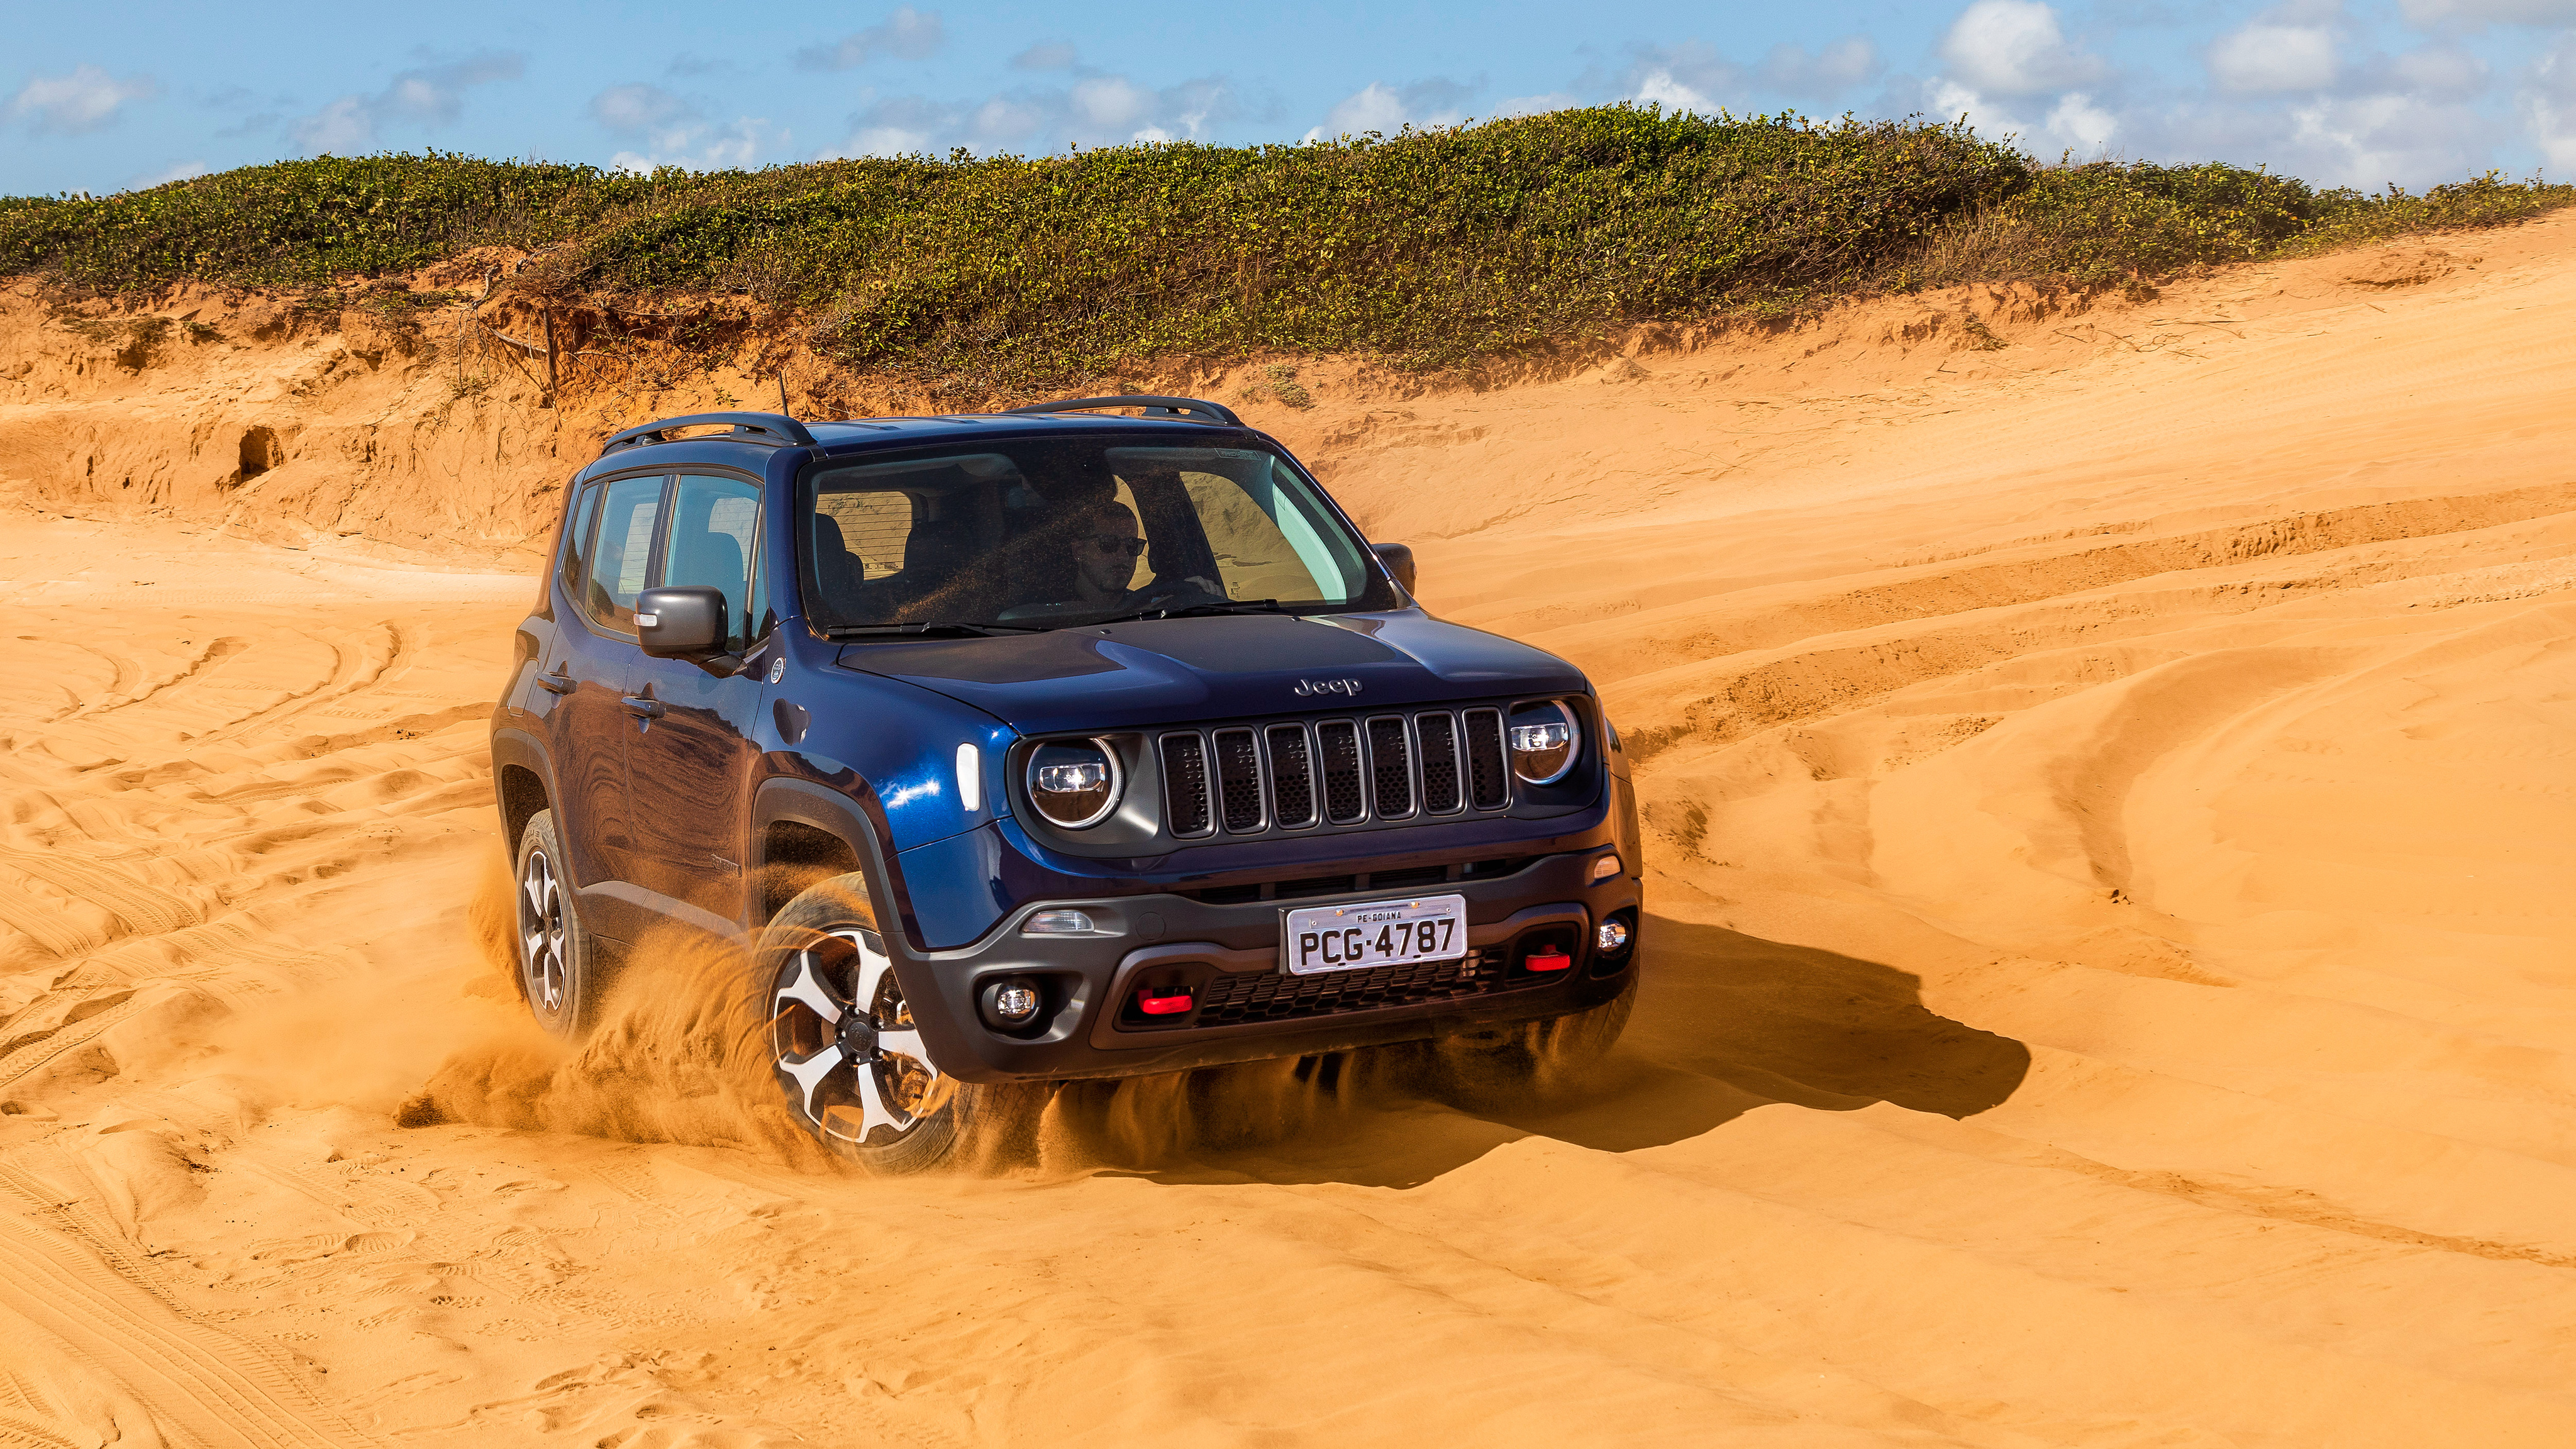 Jeep Renegade mod restyling